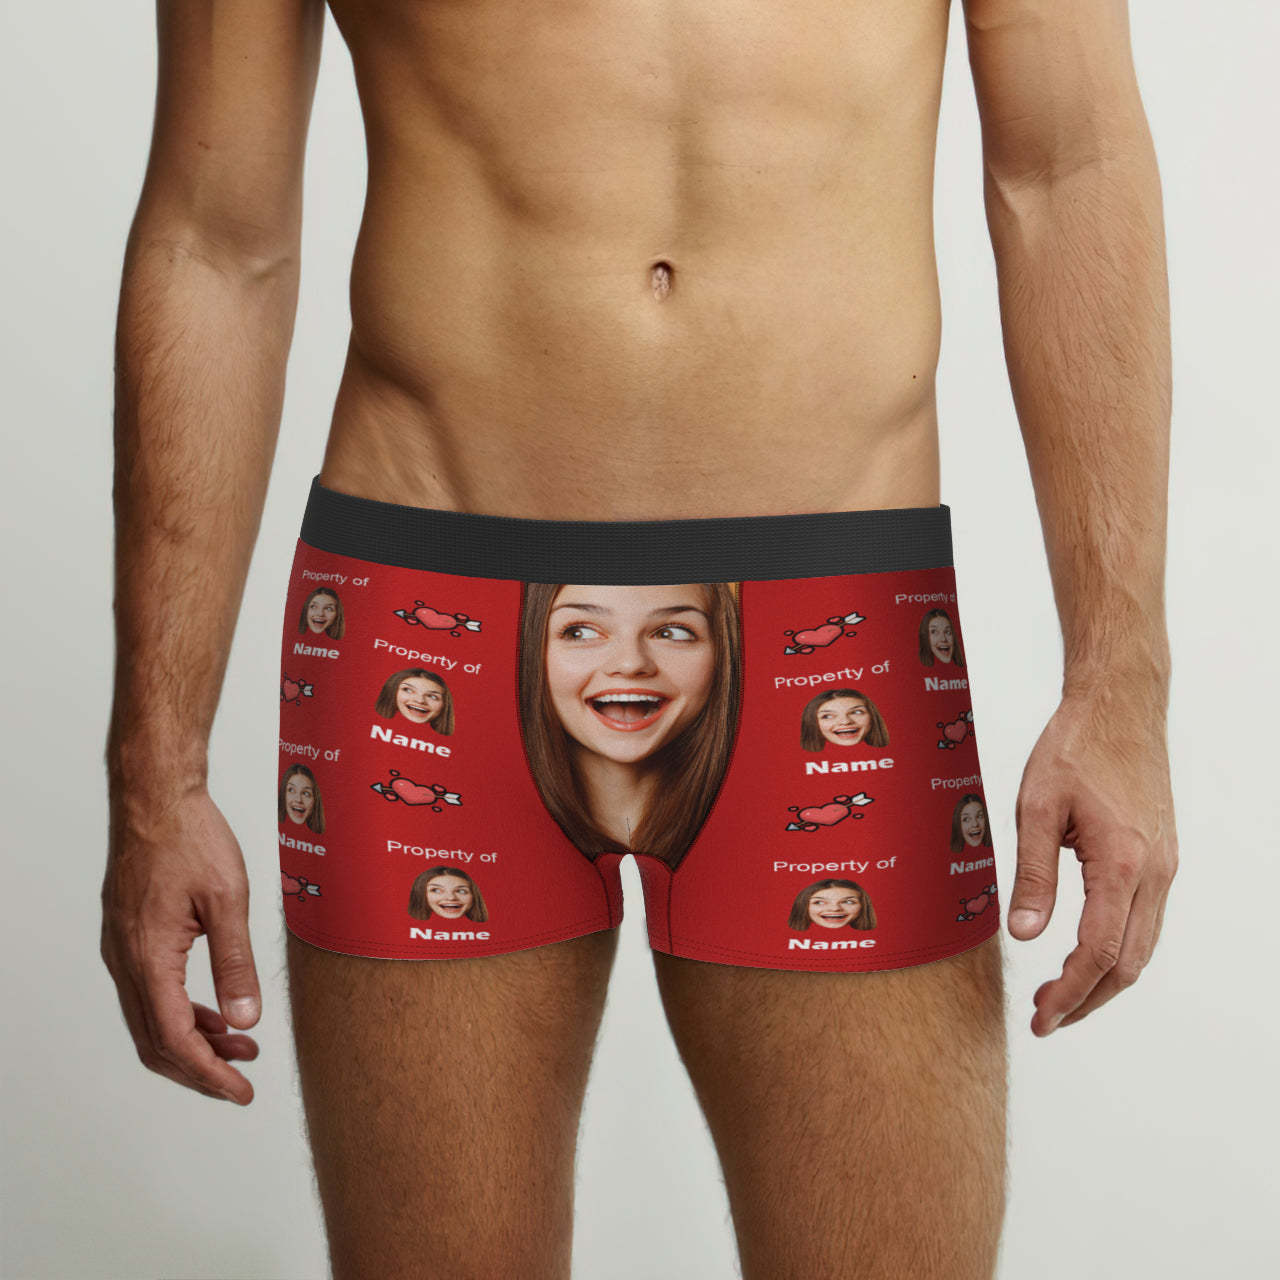 Customized Boxer Briefs Love Heart Property of Name Men's Personalised Underwear Funny Gift - FaceBoxerUK